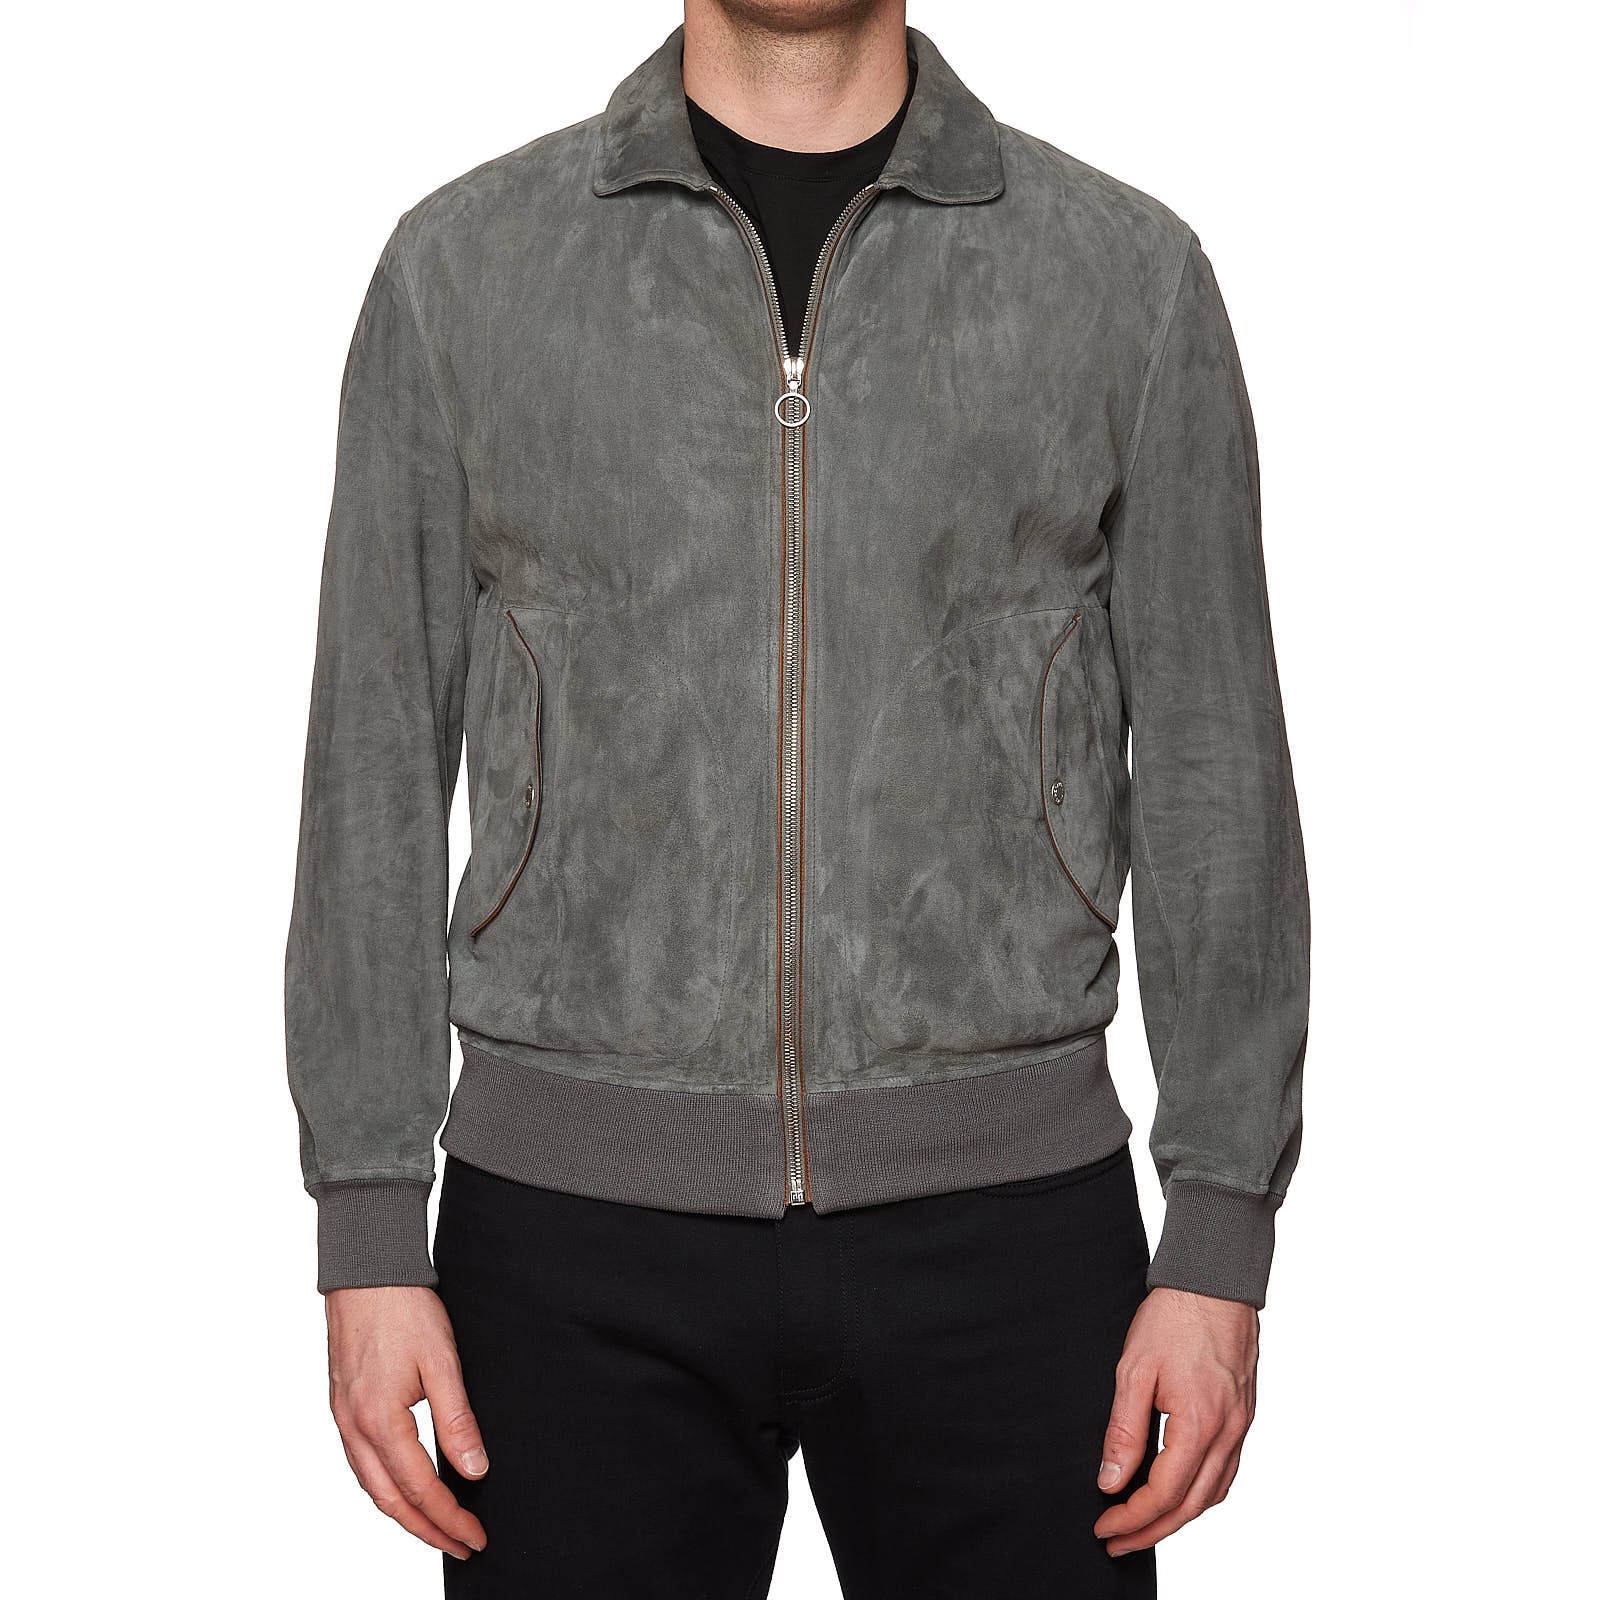 SERAPHIN Gray Goat Suede Leather Unlined Bomber Jacket FR 48 US M SERAPHIN